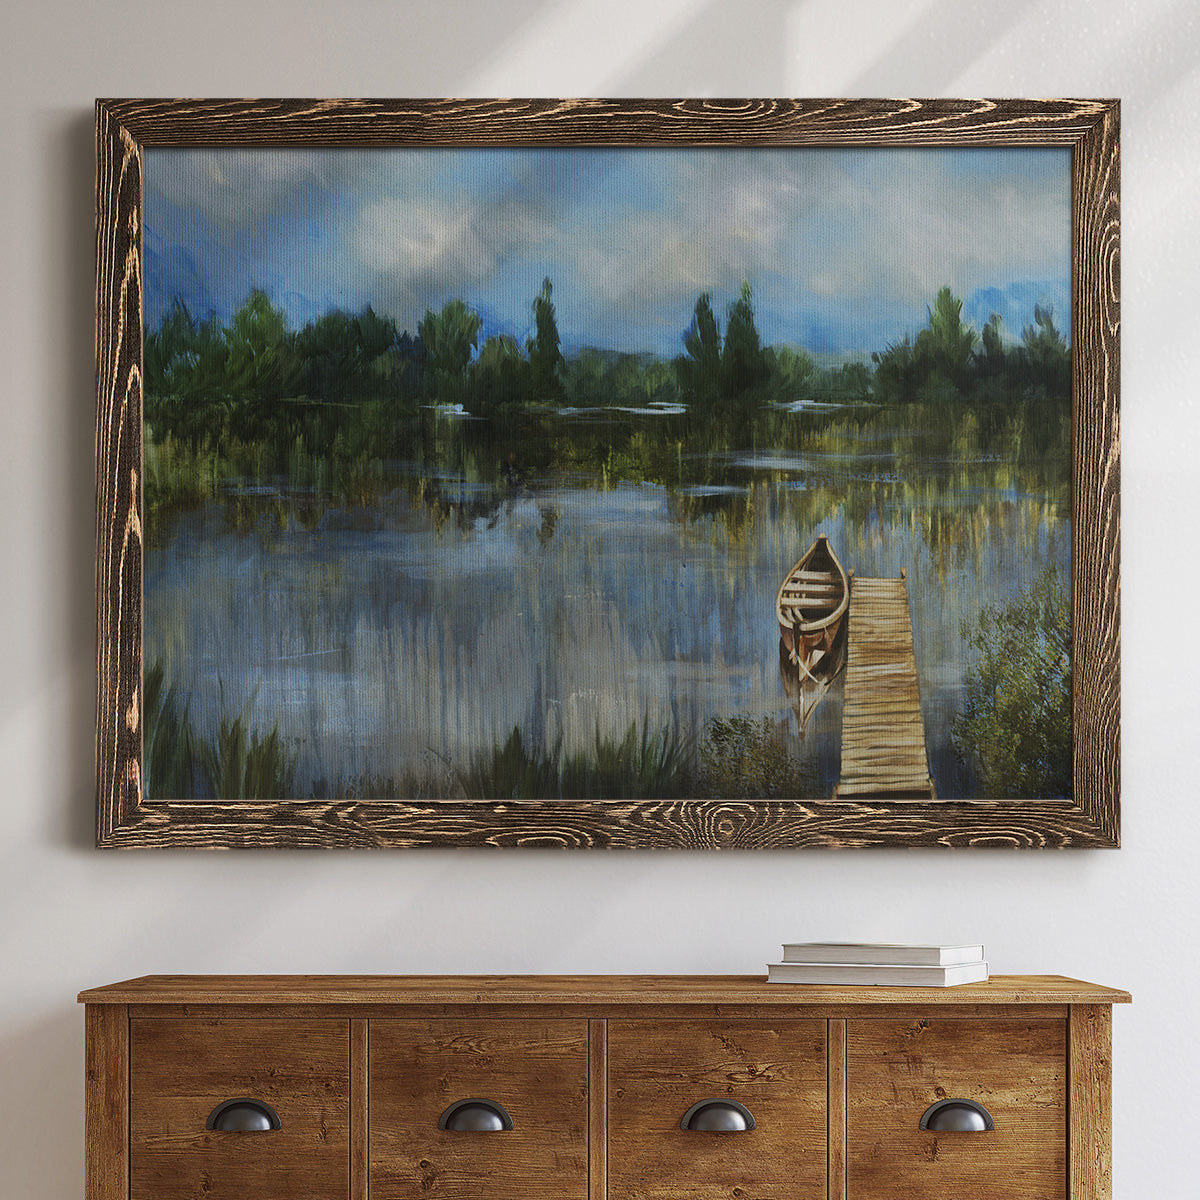 A Quiet Place-Premium Framed Canvas - Ready to Hang